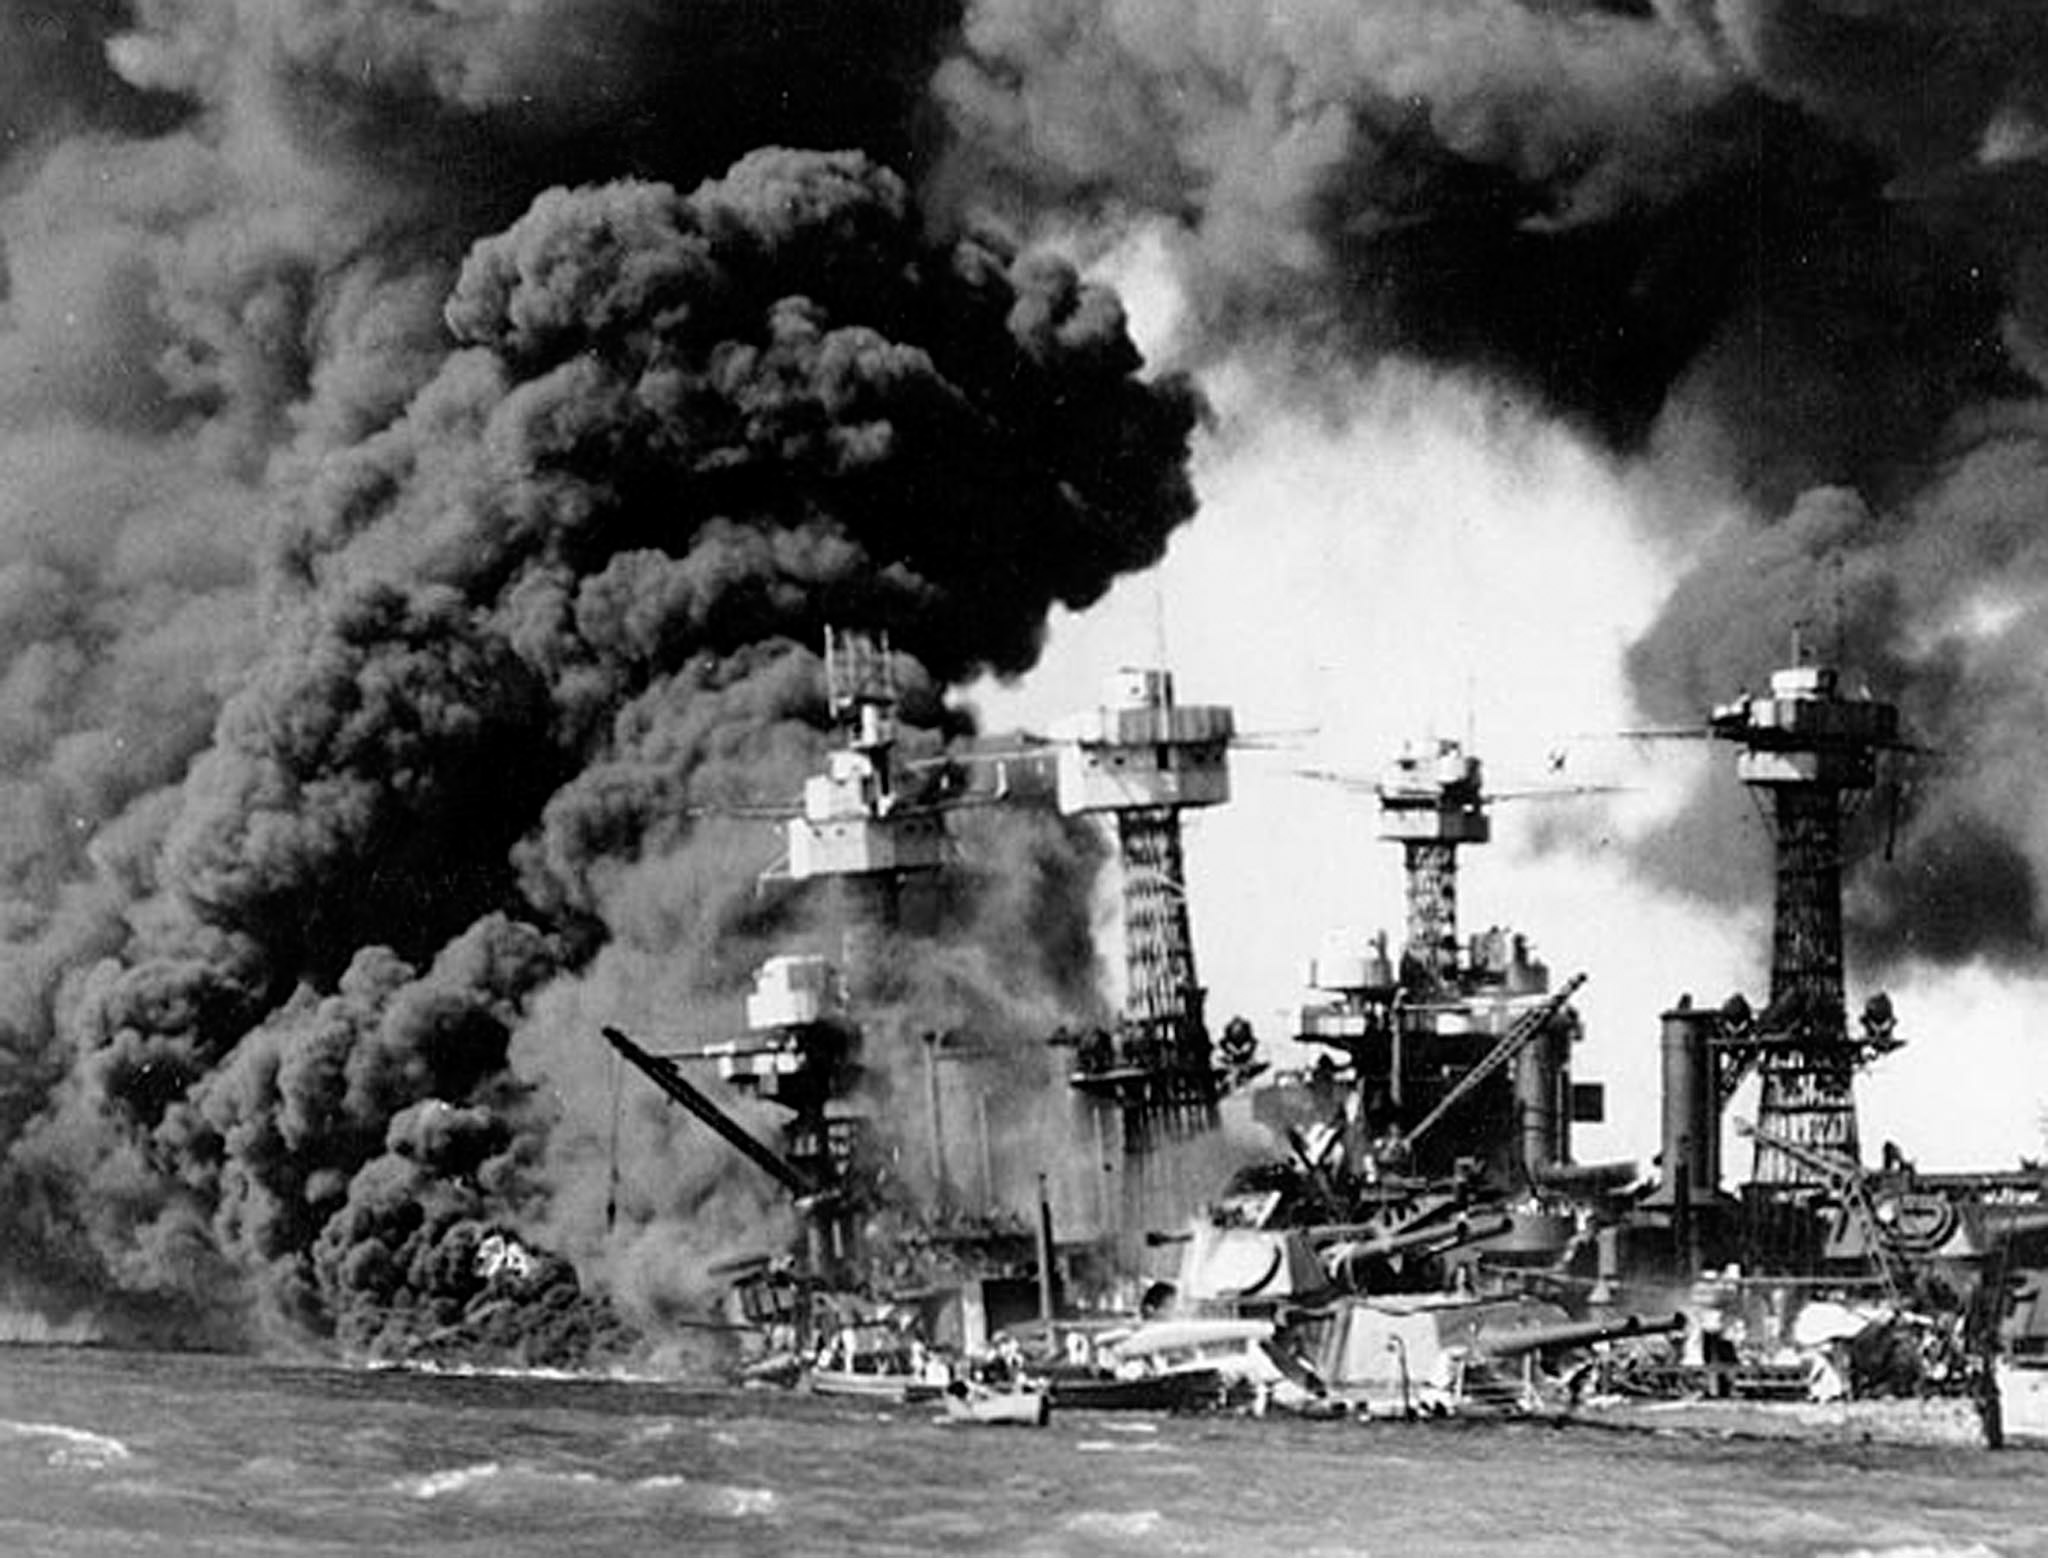 Today in Masonic History - The Attack on Pearl Harbor